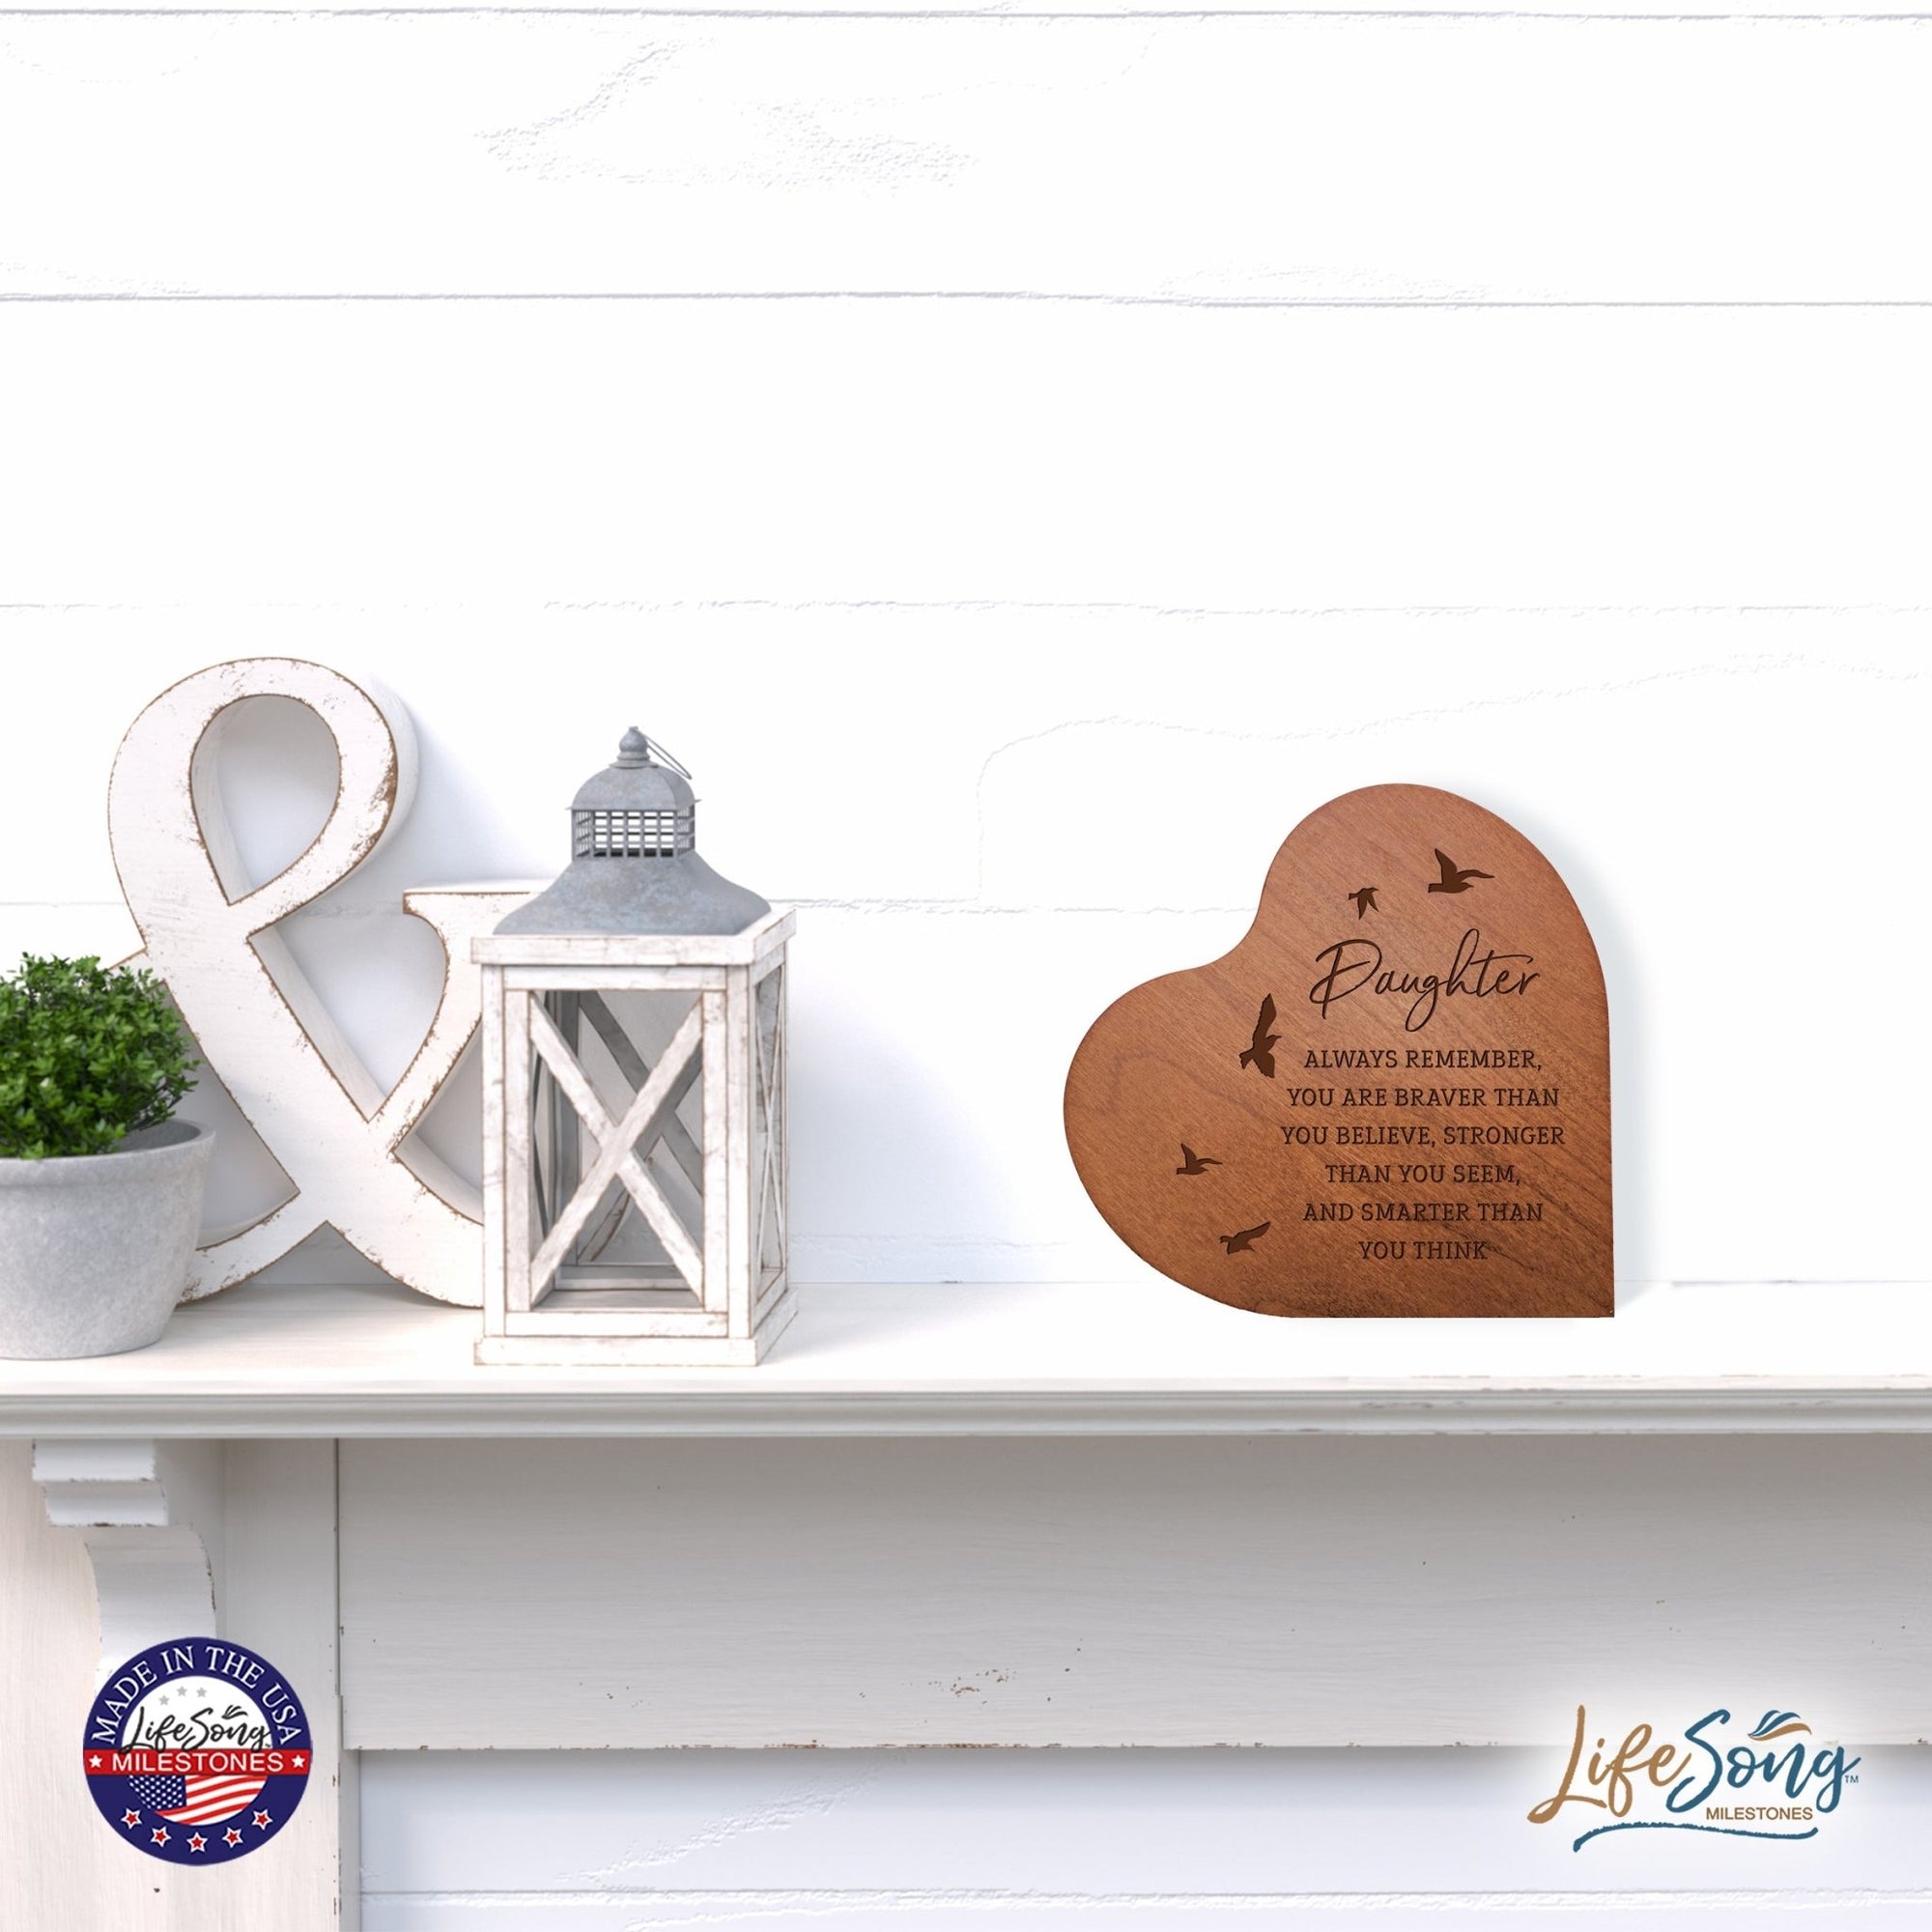 Modern Daughter’s Love Solid Wood Heart Decoration With Inspirational Verse Keepsake Gift 5x5.25 - Daughter Always Remember = Smarter Than You Think - LifeSong Milestones